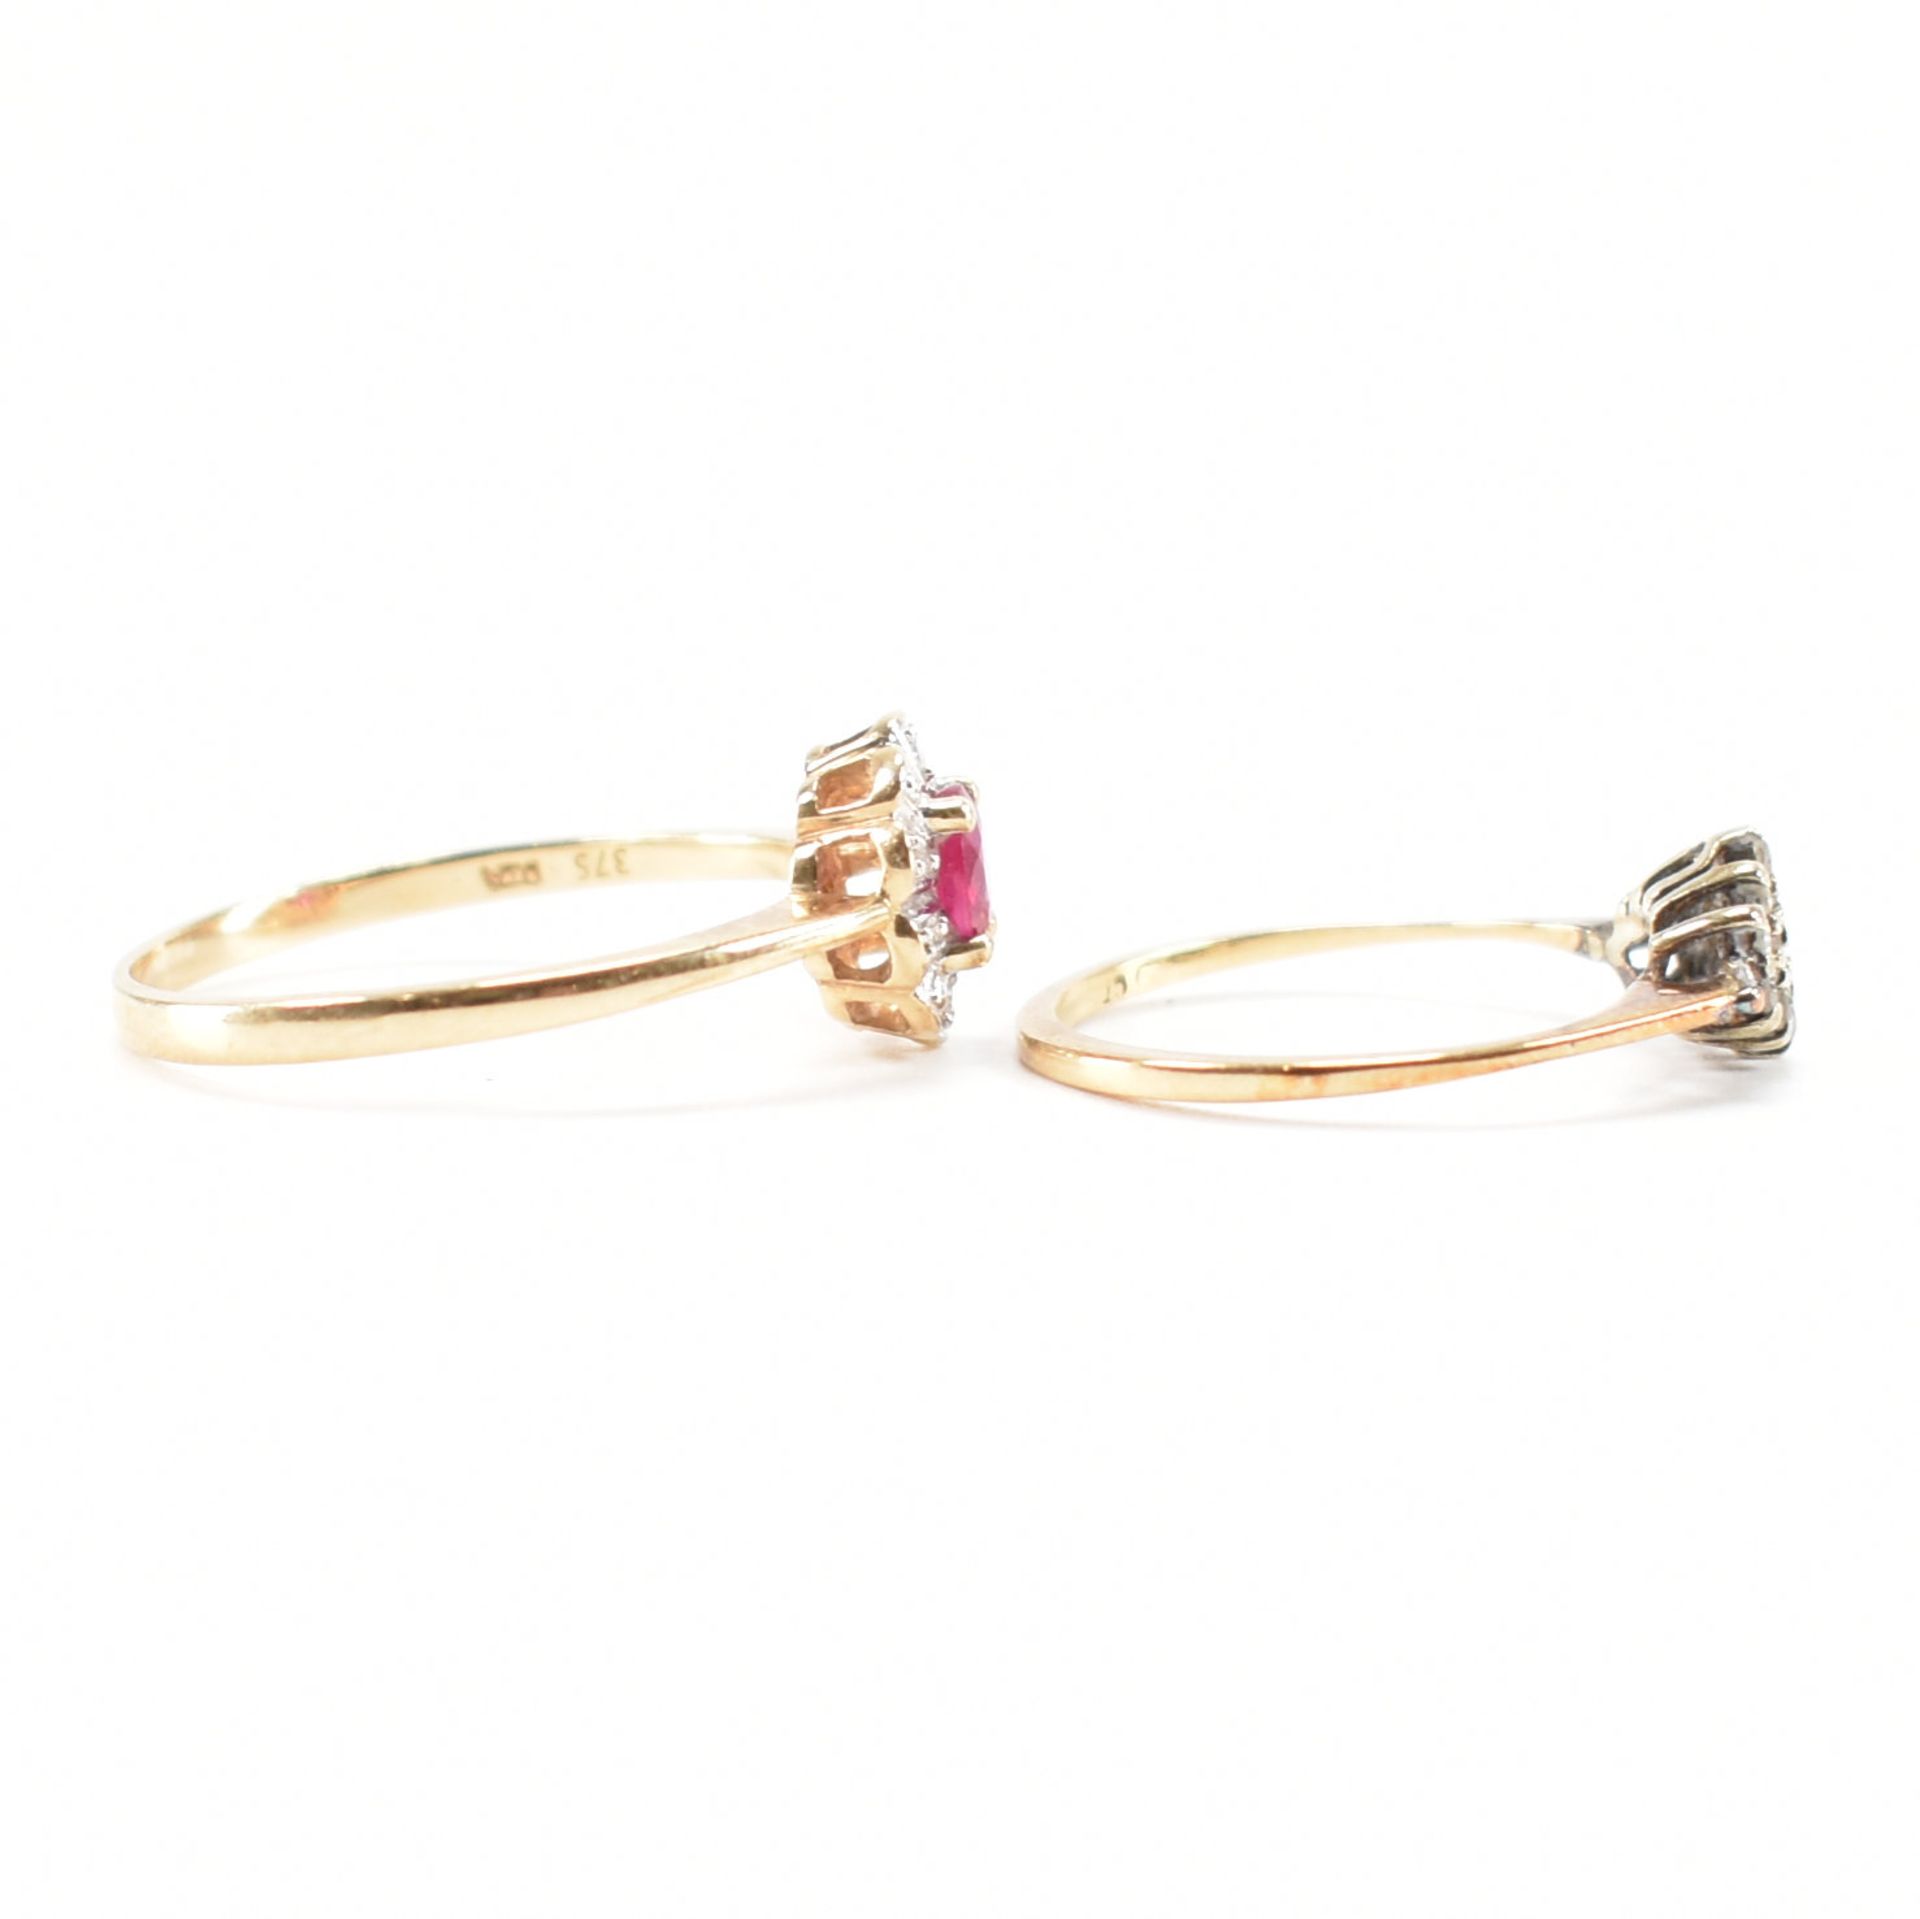 TWO VINTAGE GOLD RINGS - RUBY & DIAMOND - Image 5 of 10